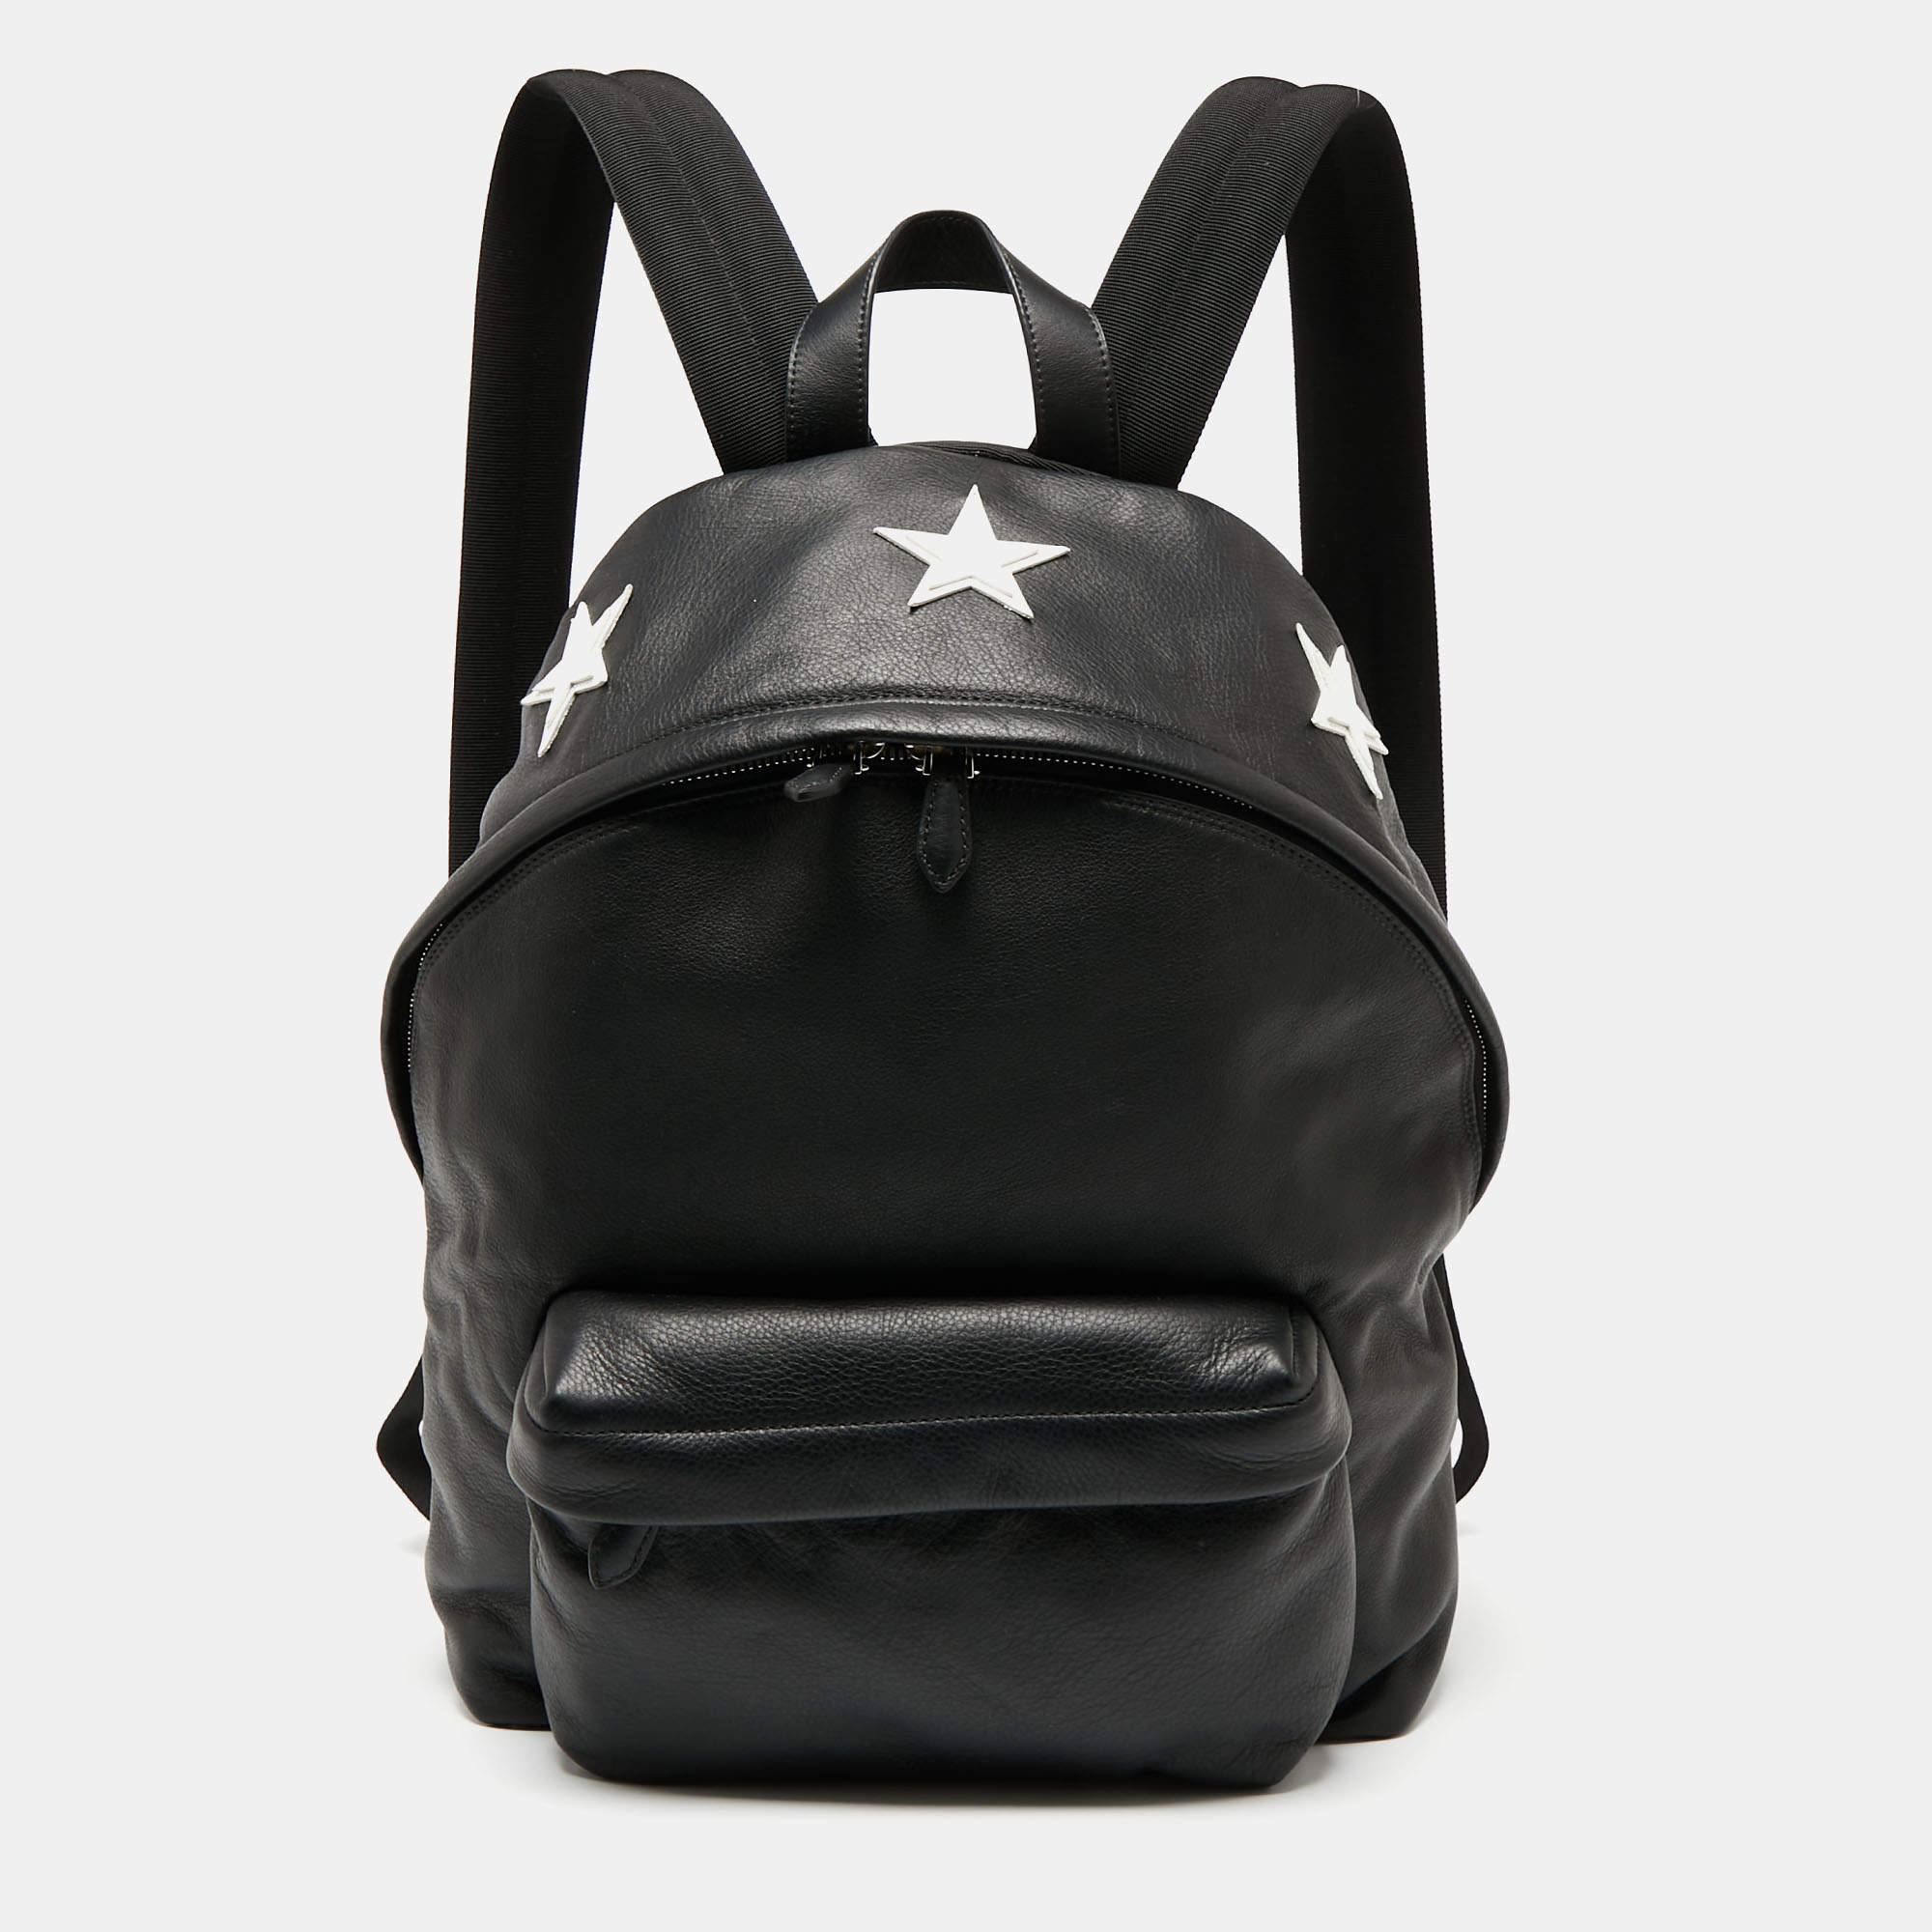 Givenchy Black Leather Star Backpack